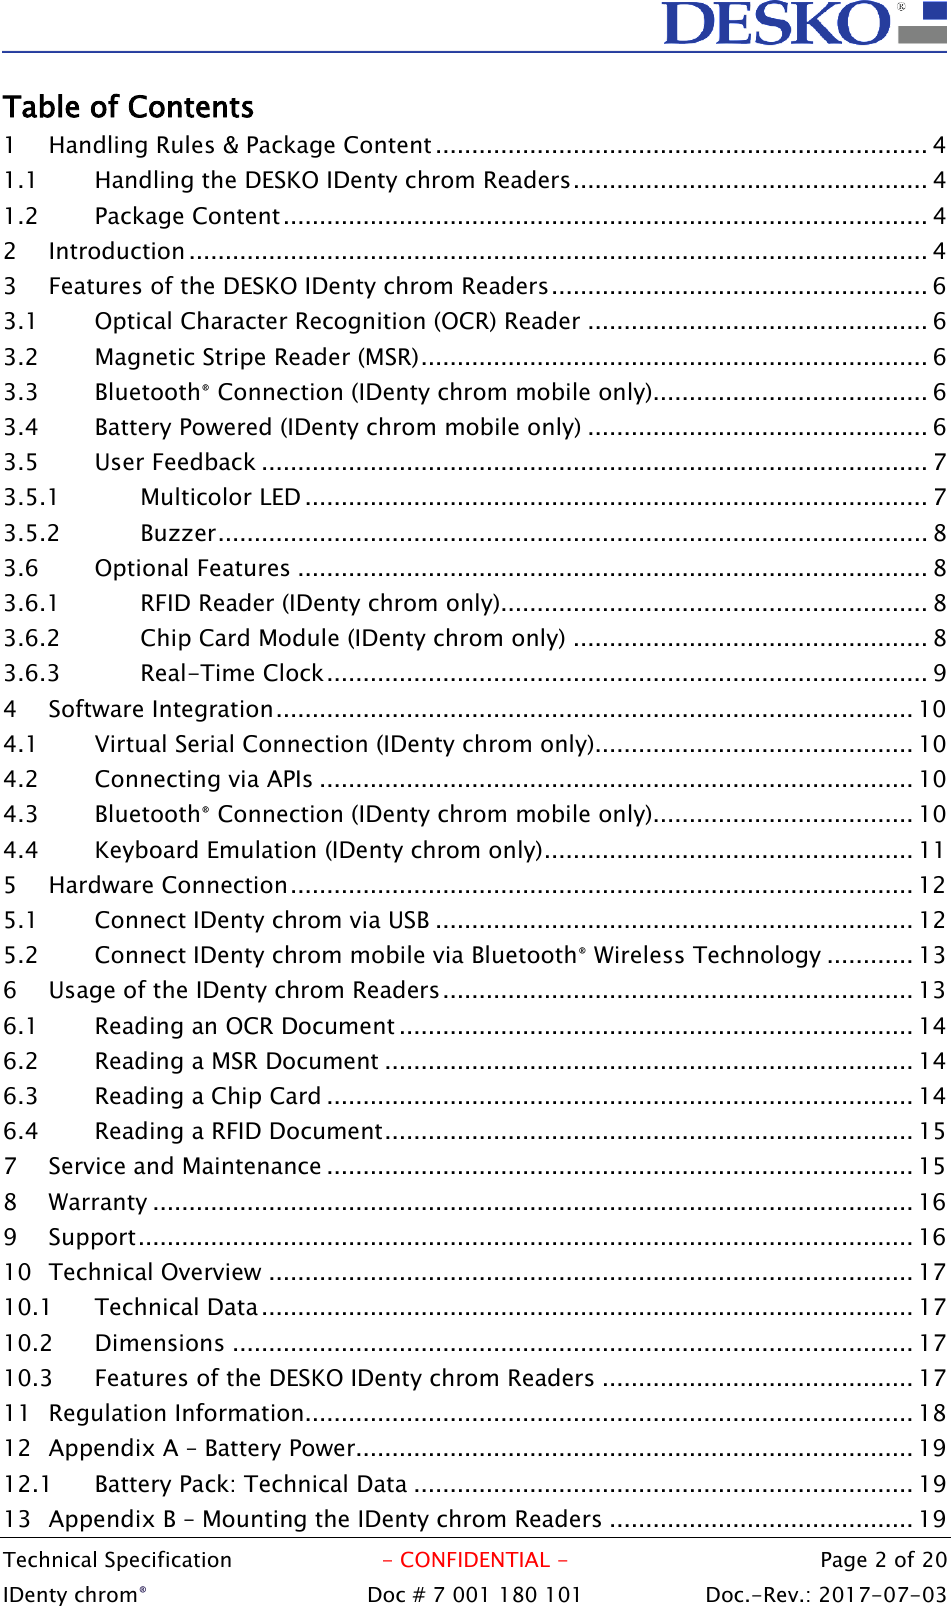  Technical Specification  - CONFIDENTIAL -  Page 2 of 20 IDenty chrom®  Doc # 7 001 180 101   Doc.-Rev.: 2017-07-03   Table of Contents 1 Handling Rules &amp; Package Content .................................................................... 4 1.1 Handling the DESKO IDenty chrom Readers ................................................. 4 1.2 Package Content ......................................................................................... 4 2 Introduction ...................................................................................................... 4 3 Features of the DESKO IDenty chrom Readers .................................................... 6 3.1 Optical Character Recognition (OCR) Reader ............................................... 6 3.2 Magnetic Stripe Reader (MSR) ...................................................................... 6 3.3 Bluetooth® Connection (IDenty chrom mobile only)...................................... 6 3.4 Battery Powered (IDenty chrom mobile only) ............................................... 6 3.5 User Feedback ............................................................................................ 7 3.5.1 Multicolor LED ...................................................................................... 7 3.5.2 Buzzer .................................................................................................. 8 3.6 Optional Features ....................................................................................... 8 3.6.1 RFID Reader (IDenty chrom only)........................................................... 8 3.6.2 Chip Card Module (IDenty chrom only) ................................................. 8 3.6.3 Real-Time Clock ................................................................................... 9 4 Software Integration ........................................................................................ 10 4.1 Virtual Serial Connection (IDenty chrom only)............................................ 10 4.2 Connecting via APIs .................................................................................. 10 4.3 Bluetooth® Connection (IDenty chrom mobile only).................................... 10 4.4 Keyboard Emulation (IDenty chrom only) ................................................... 11 5 Hardware Connection ...................................................................................... 12 5.1 Connect IDenty chrom via USB .................................................................. 12 5.2 Connect IDenty chrom mobile via Bluetooth® Wireless Technology ............ 13 6 Usage of the IDenty chrom Readers ................................................................. 13 6.1 Reading an OCR Document ....................................................................... 14 6.2 Reading a MSR Document ......................................................................... 14 6.3 Reading a Chip Card ................................................................................. 14 6.4 Reading a RFID Document ......................................................................... 15 7 Service and Maintenance ................................................................................. 15 8 Warranty ......................................................................................................... 16 9 Support ........................................................................................................... 16 10 Technical Overview ......................................................................................... 17 10.1 Technical Data .......................................................................................... 17 10.2 Dimensions .............................................................................................. 17 10.3 Features of the DESKO IDenty chrom Readers ........................................... 17 11 Regulation Information.................................................................................... 18 12 Appendix A – Battery Power............................................................................. 19 12.1 Battery Pack: Technical Data ..................................................................... 19 13 Appendix B – Mounting the IDenty chrom Readers .......................................... 19 